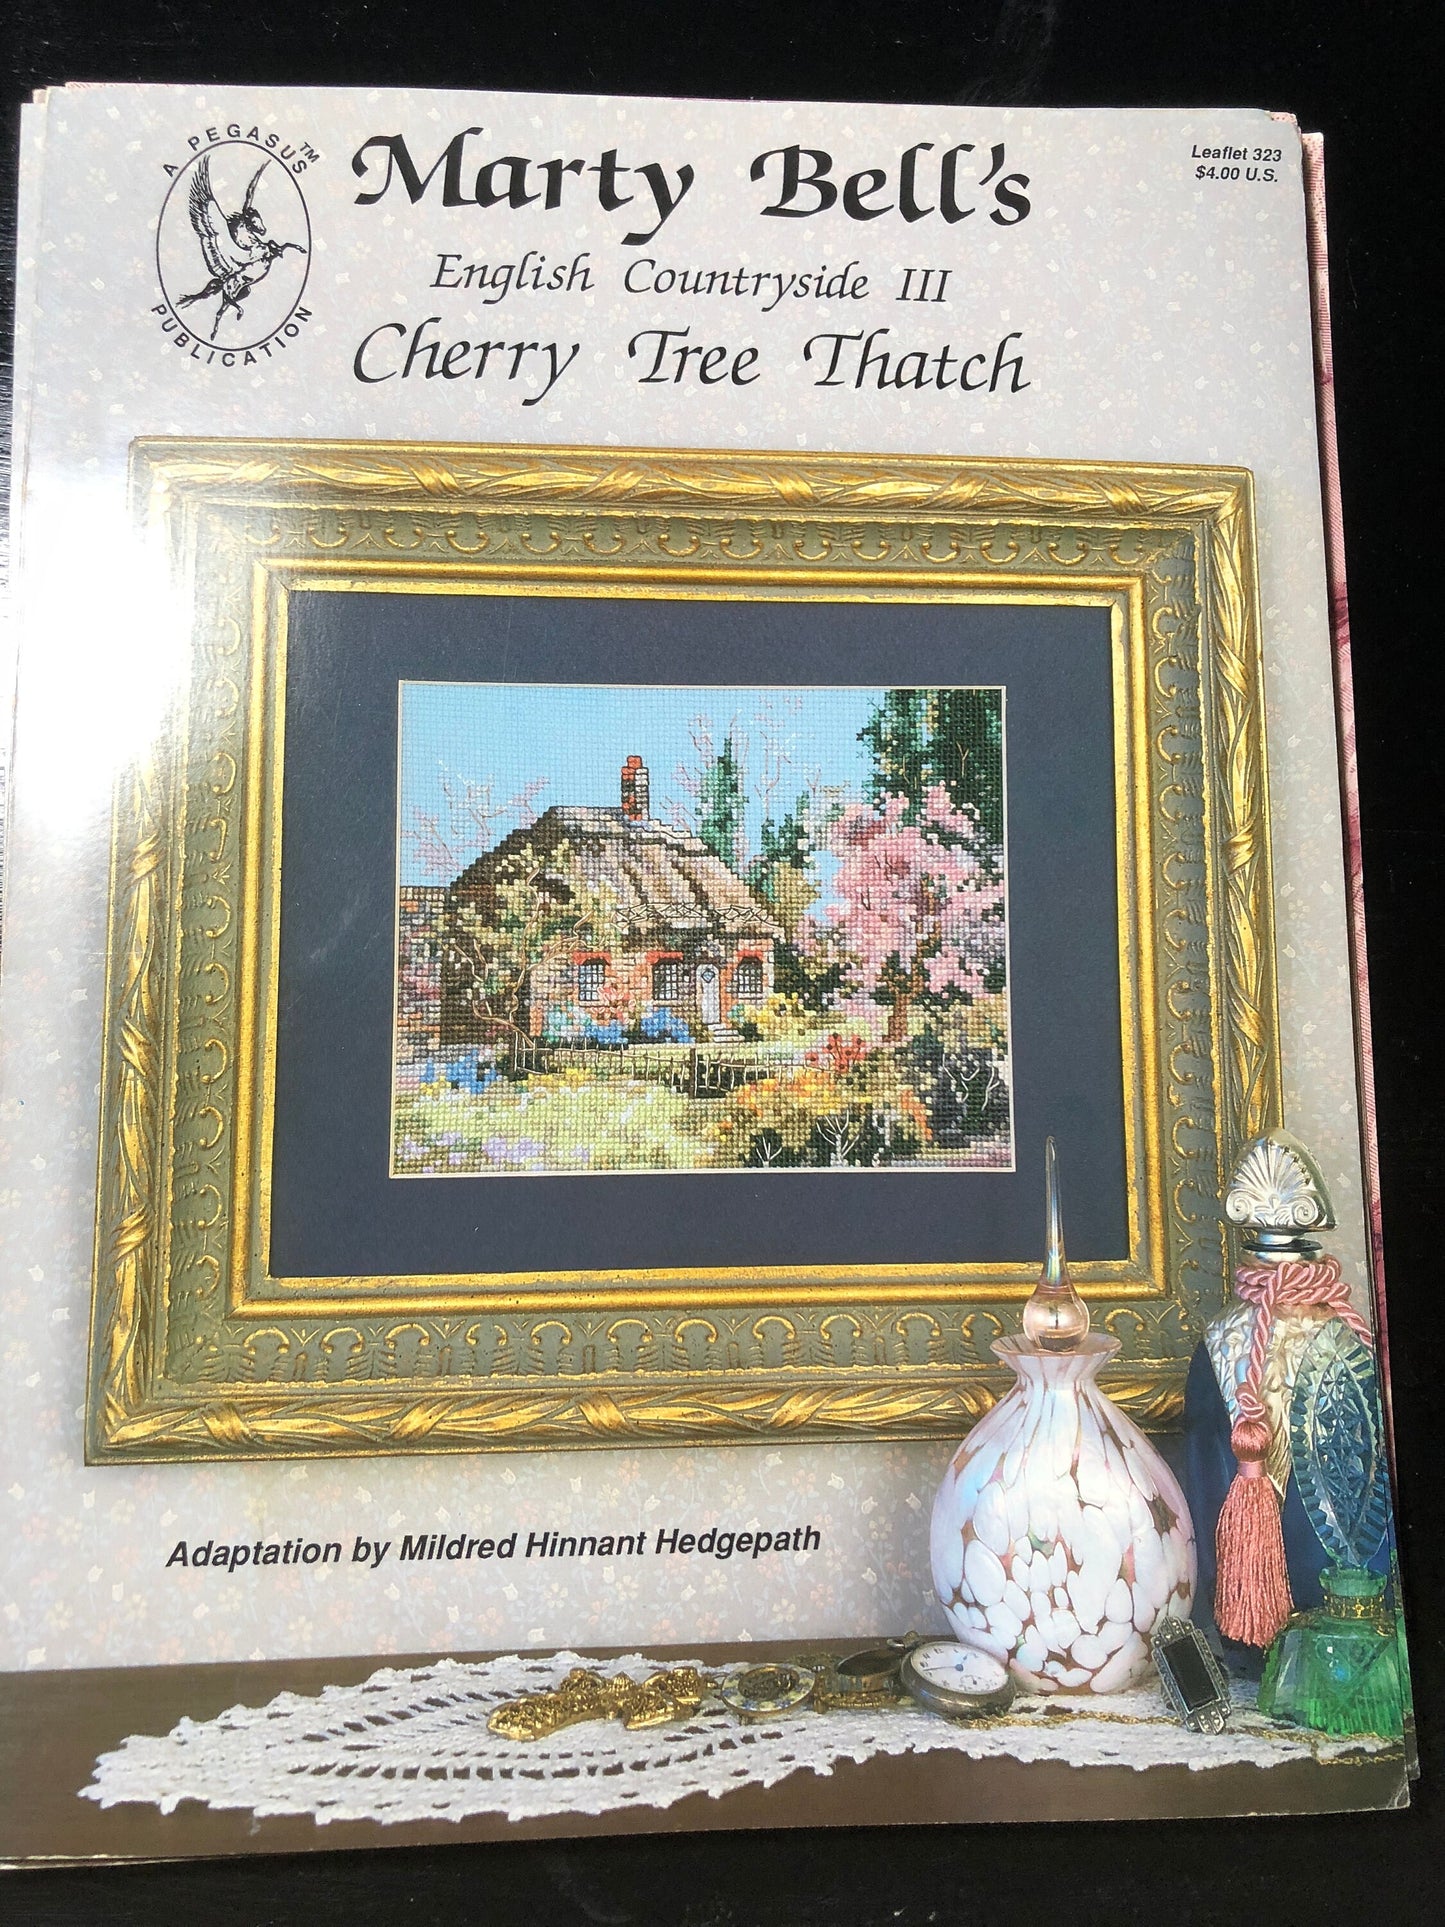 Pegasus, Marty Bell, English Countryside III, Cherry Tree Thatch, Vintage 1991, counted cross stitch chart*